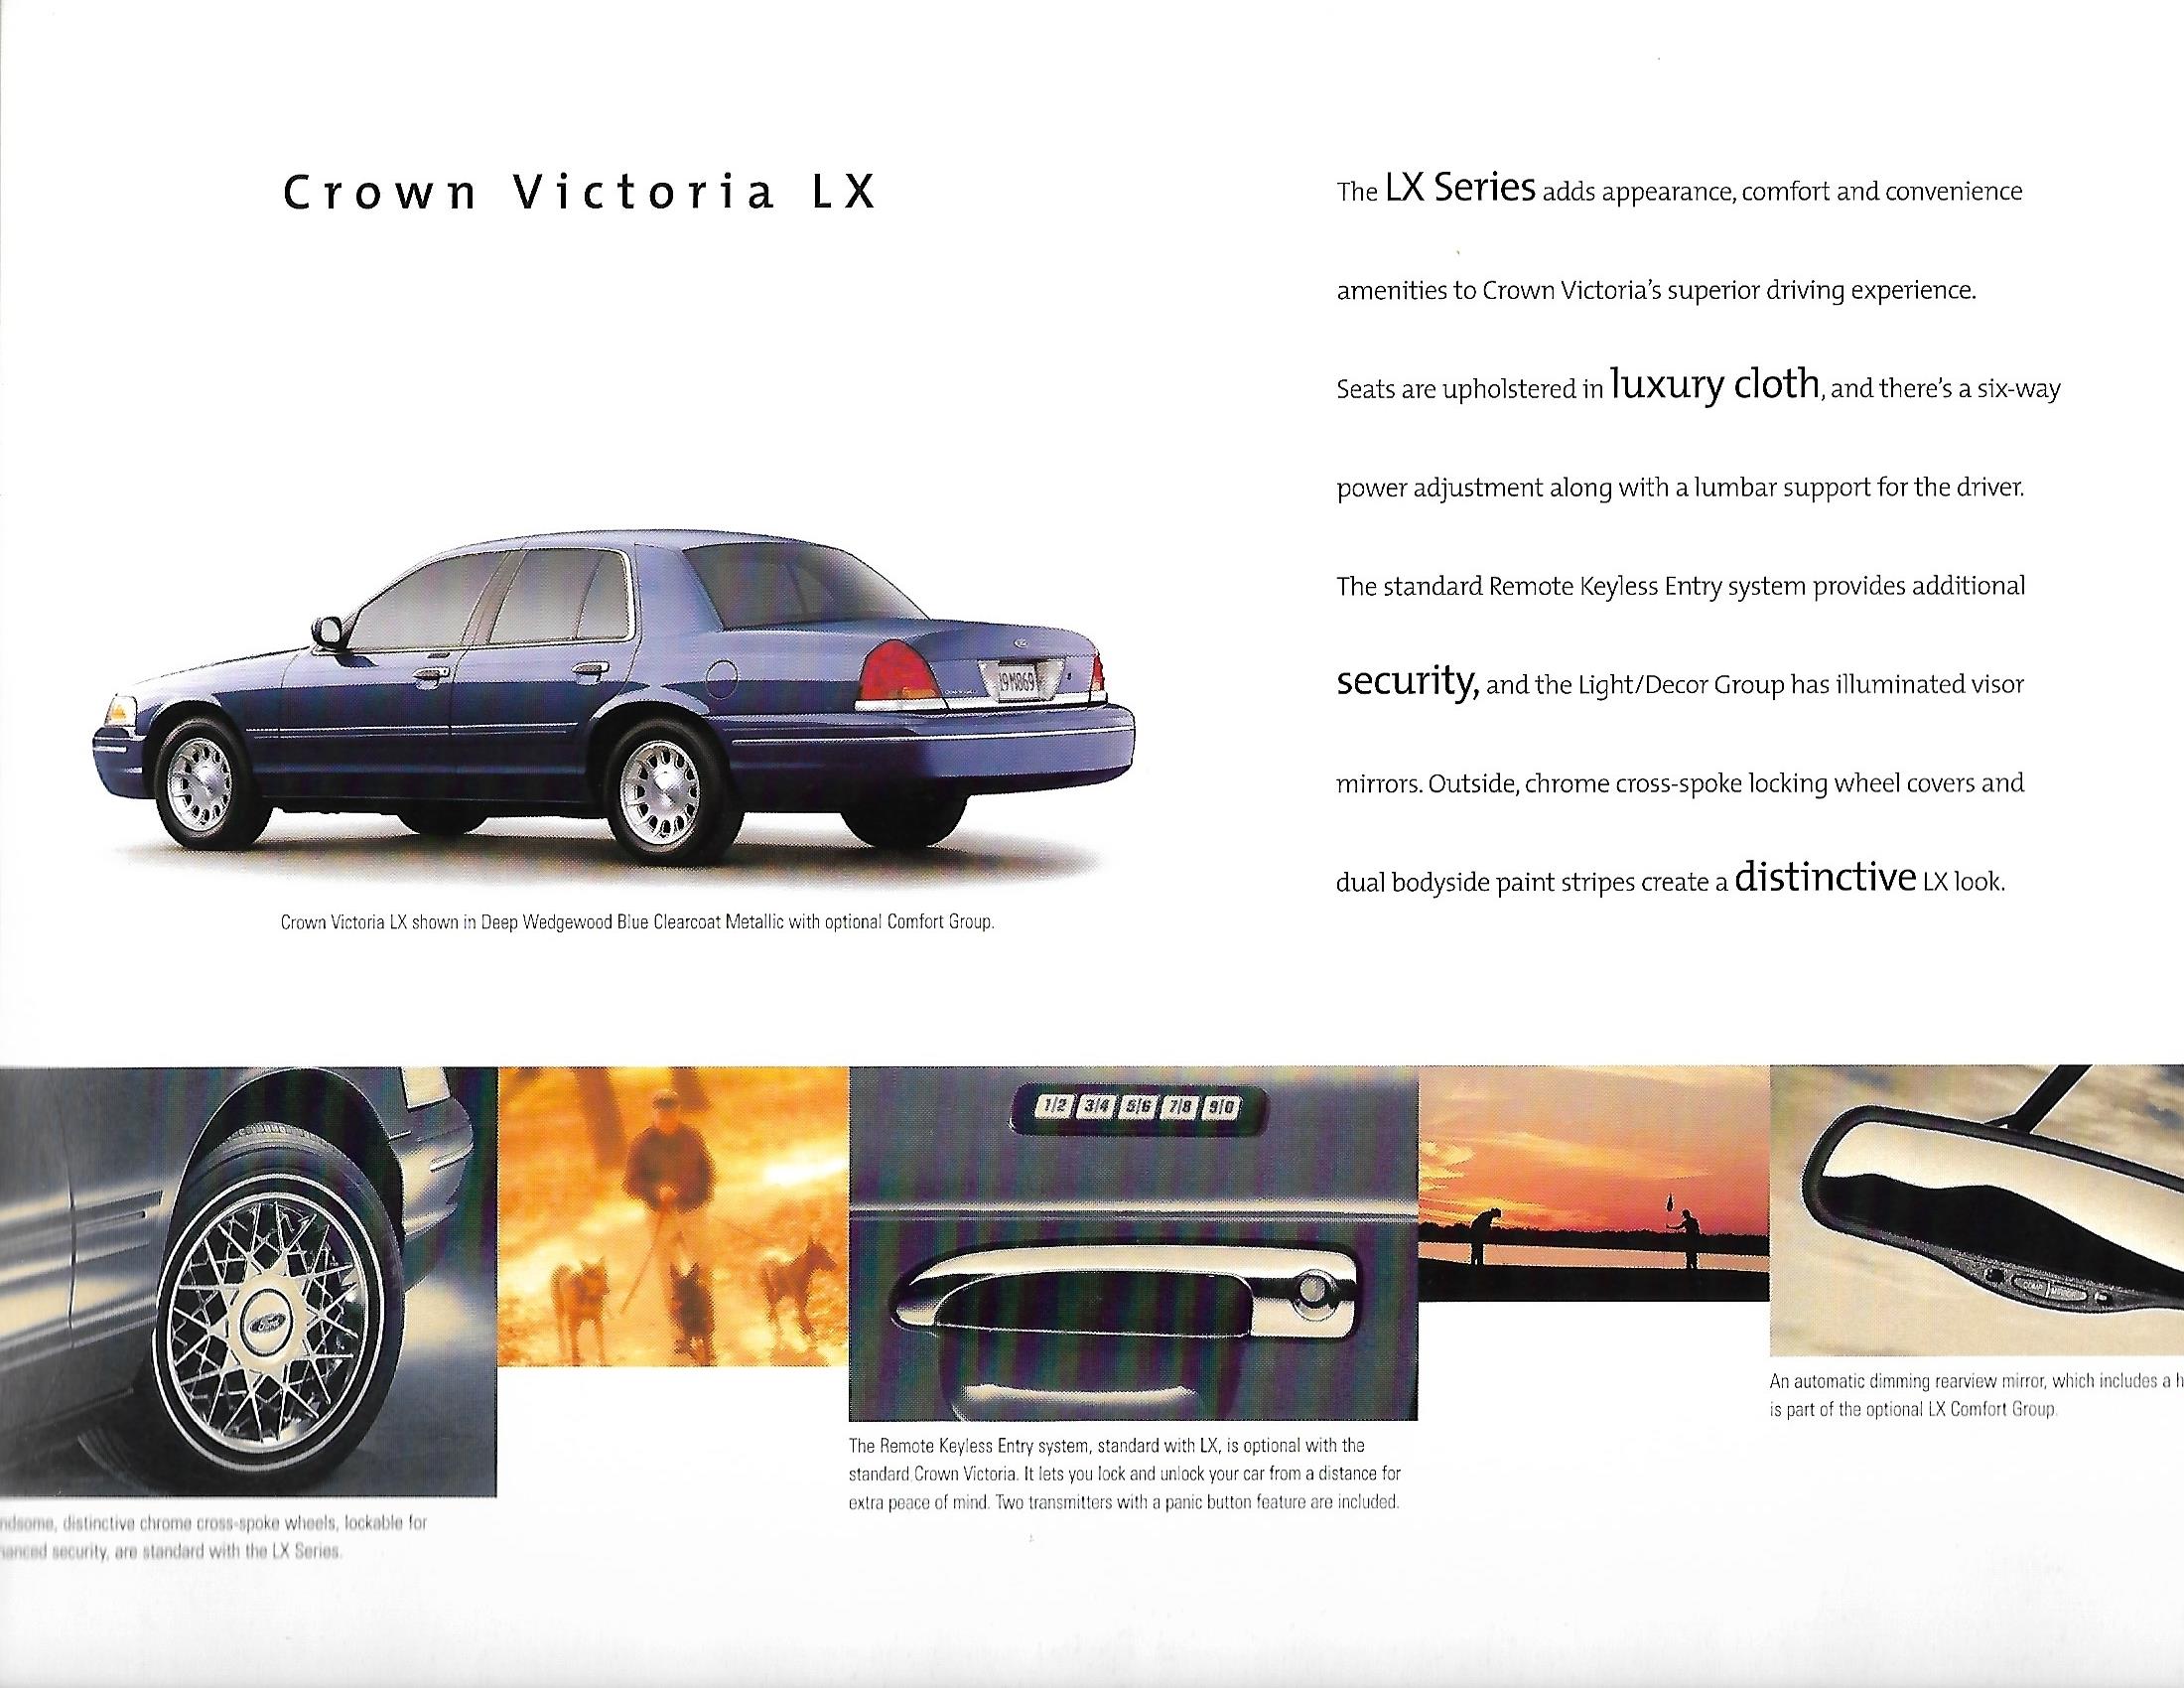 1999 Ford Crown Victoria-07